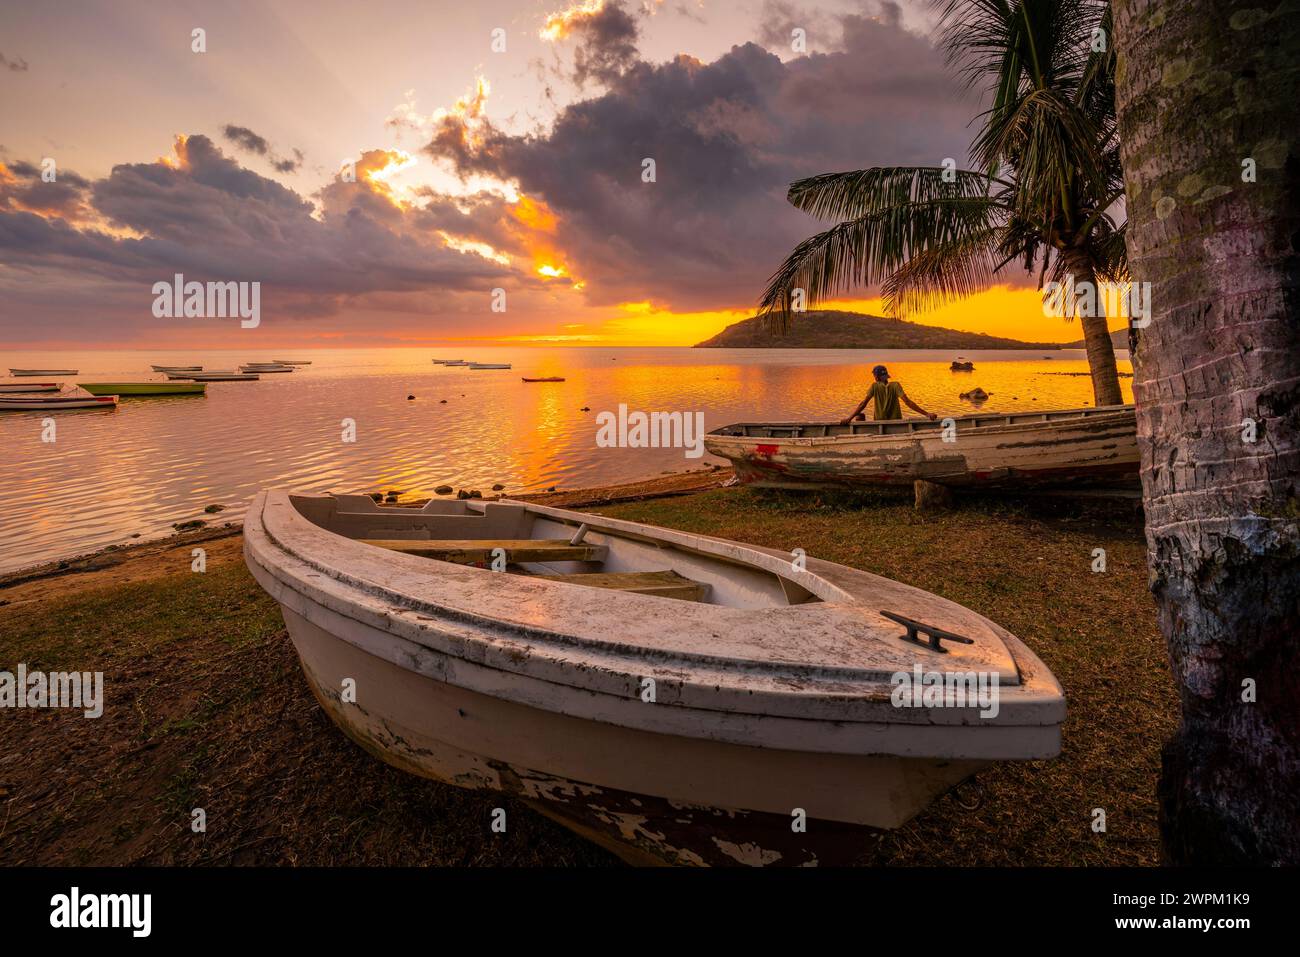 View of local man sat on boat viewing Le Morne from Le Morne Brabant at sunset, Savanne District, Mauritius, Indian Ocean, Africa Stock Photo